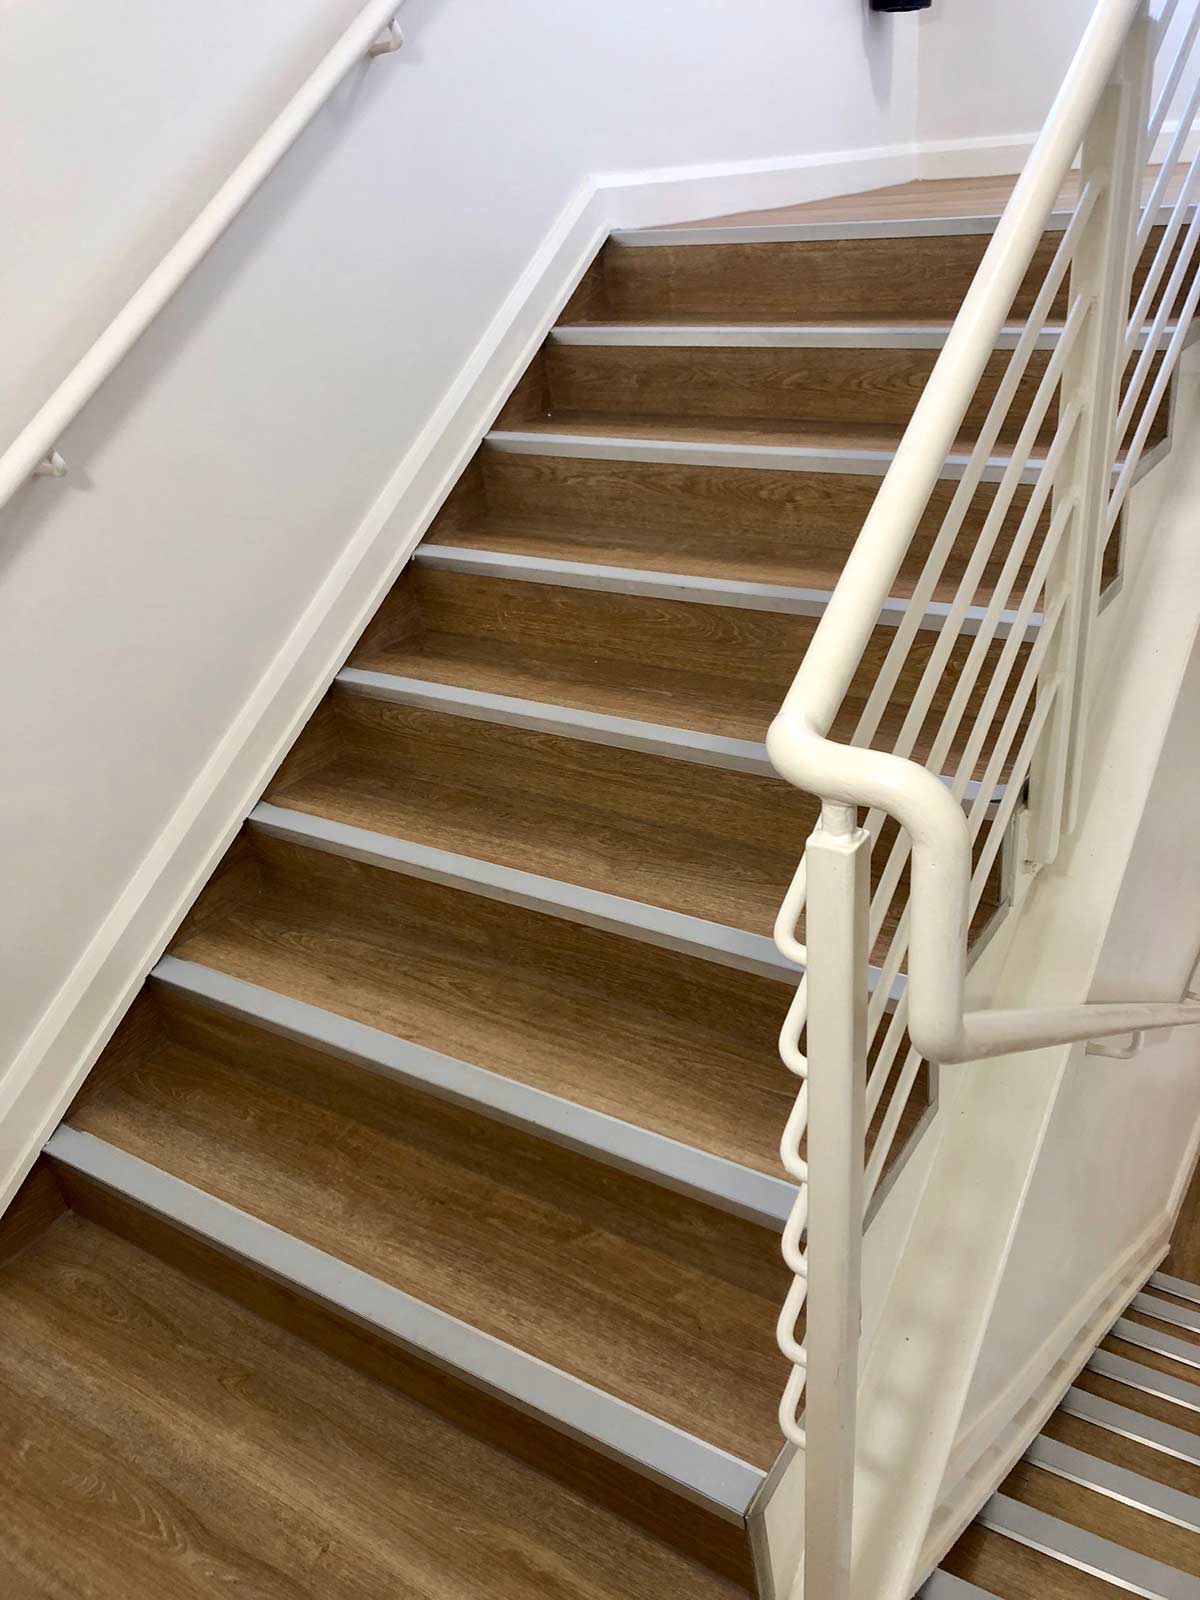 Moduleo Luxury Vinyl flooring on stairs in an Exeter care home